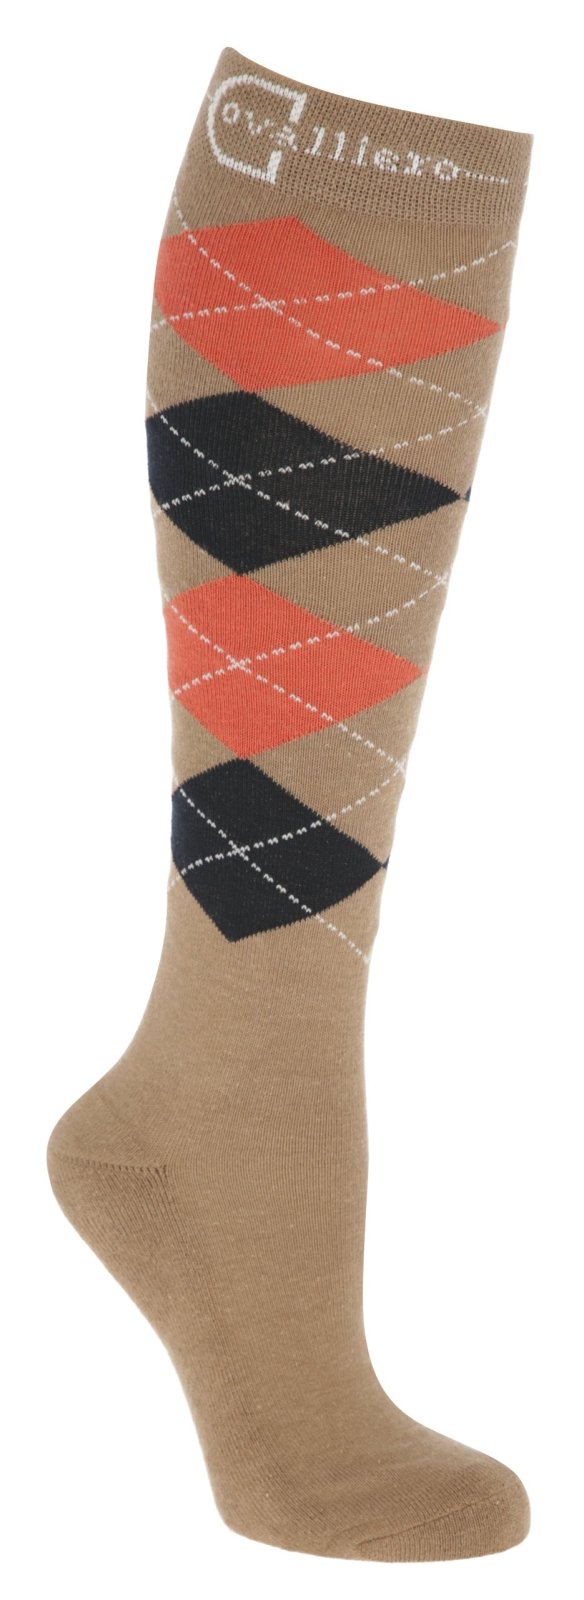 Covalliero Riding Socks in Wood/Coral/Navy - Jacks Pet and Country